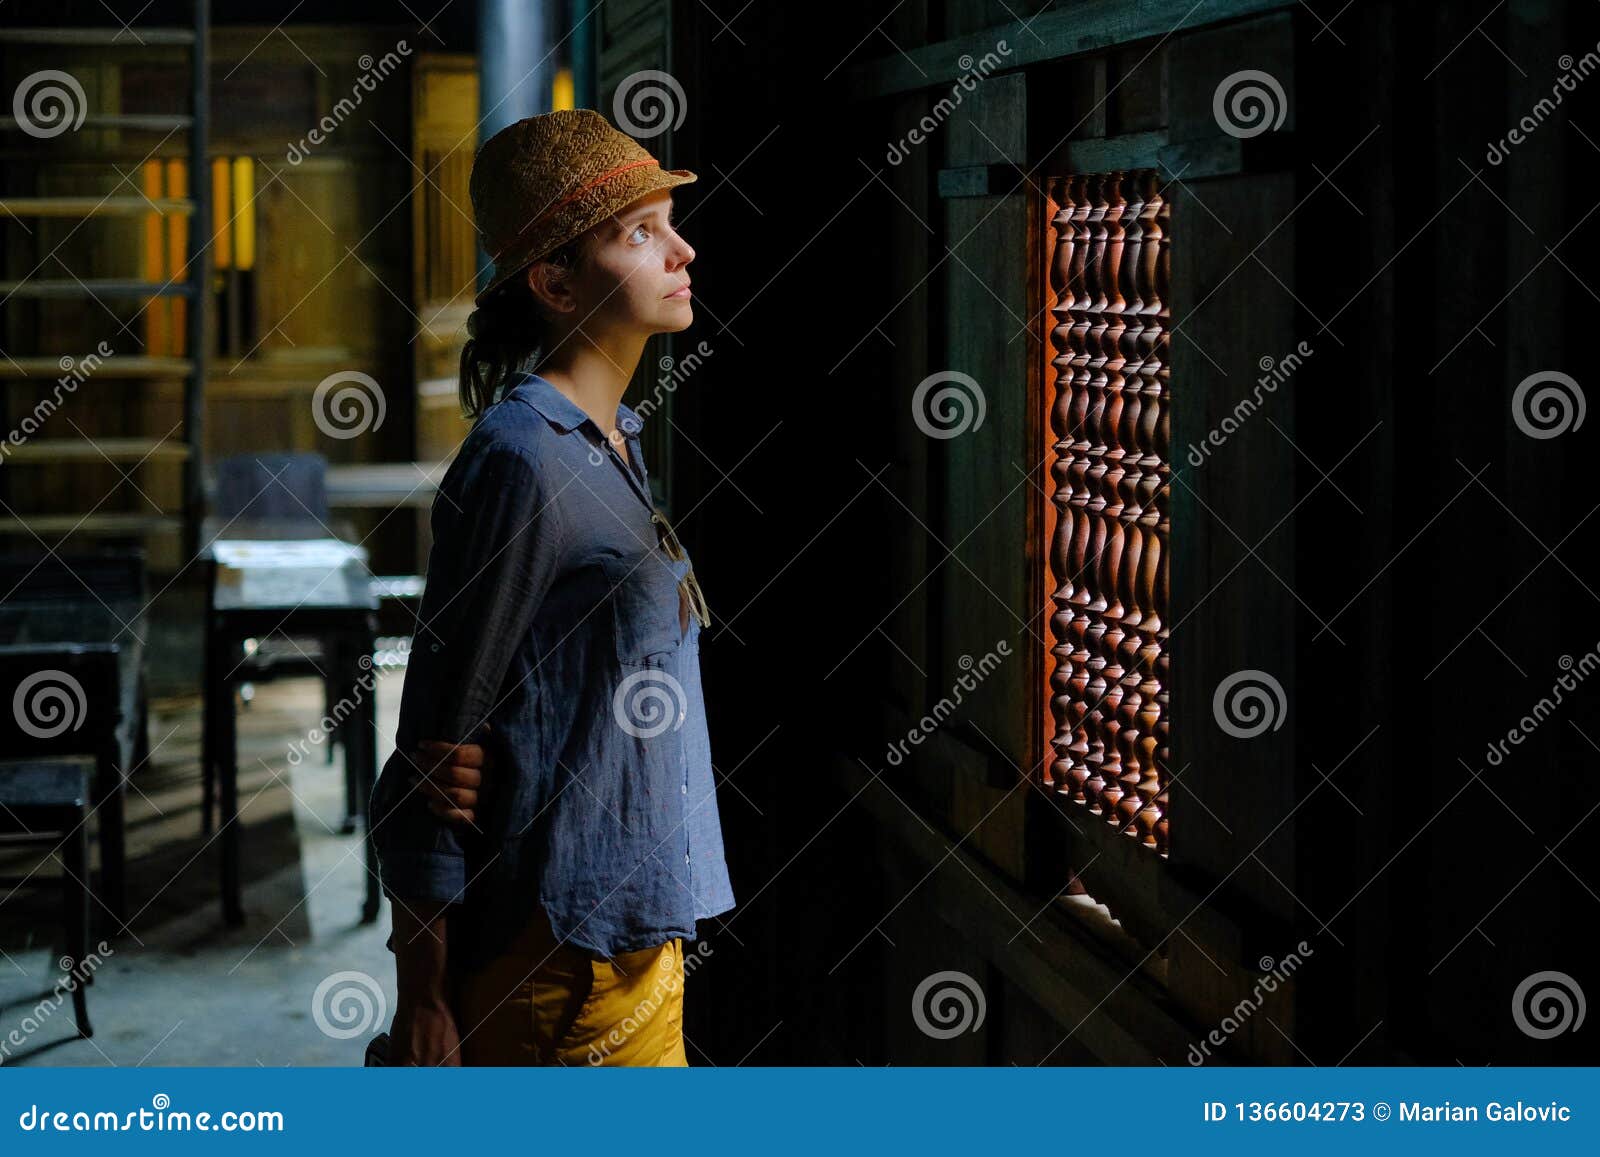 hoi an / vietnam, 11/11/2017: female tourist standing in the dark wooden interior of a traditional house tan ky in hoi an,